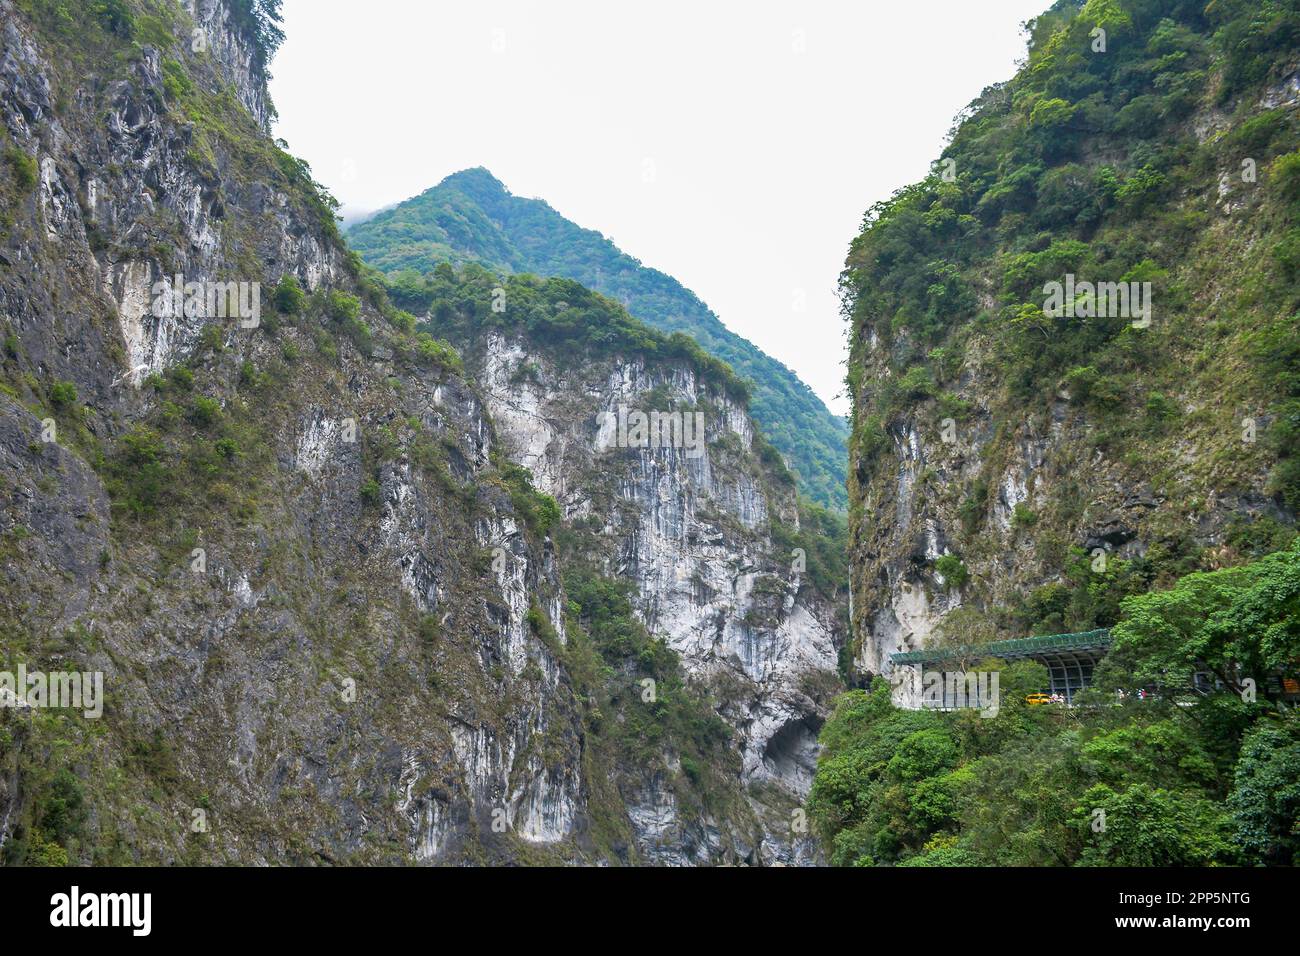 Scenic view of Taroko National Park with high mountain cliff face in Taroko National Park, Xiulin Township, Hualien, Taiwan Stock Photo